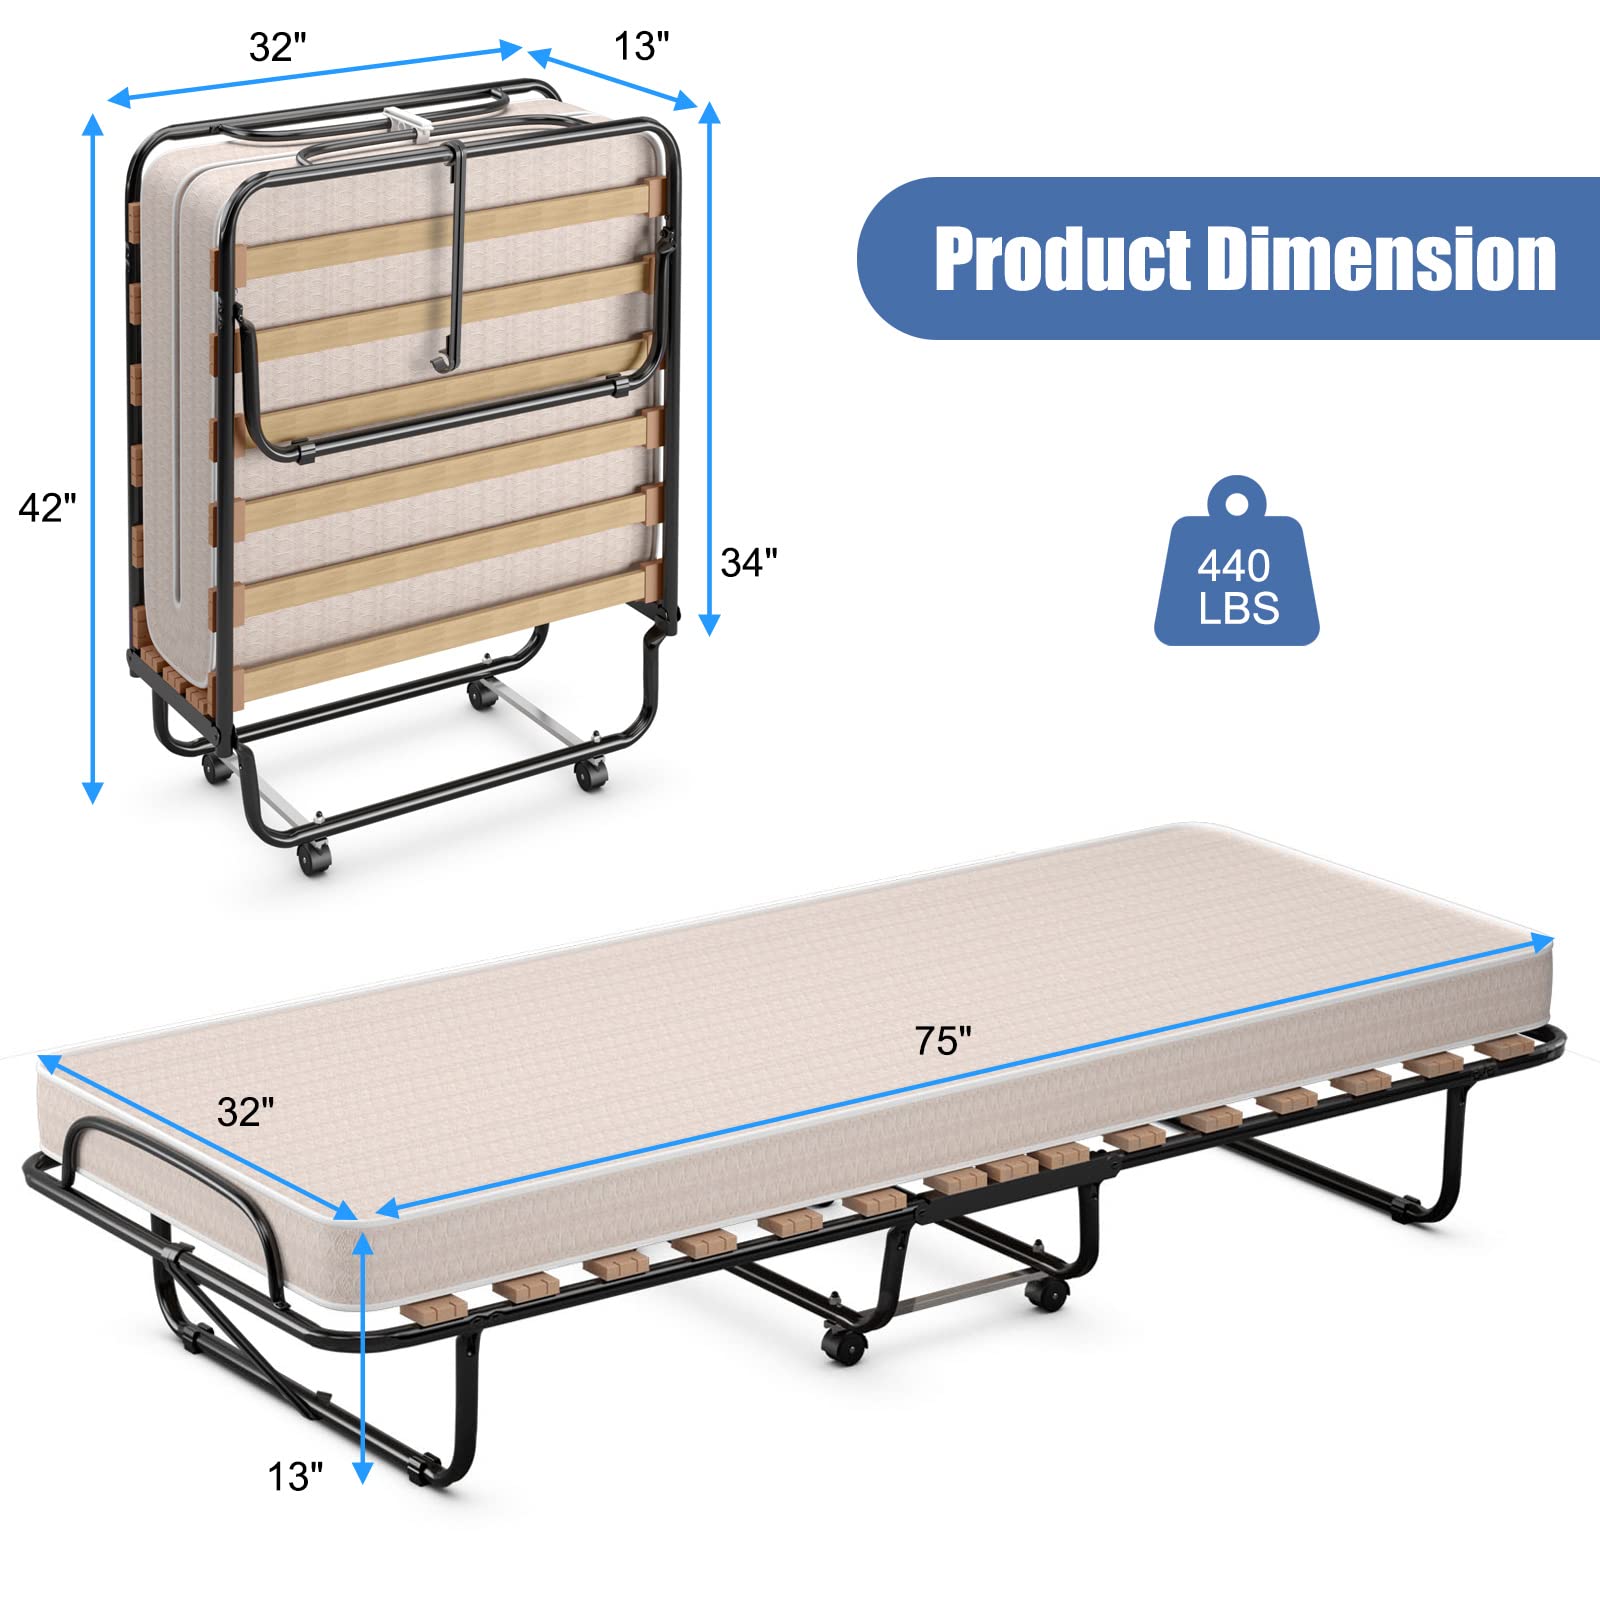 Giantex Folding Bed with Mattress for Adults, 75" x 32" Rollaway Guest Beds w/ 3 Inch Foam Mattress & Sturdy Metal Frame